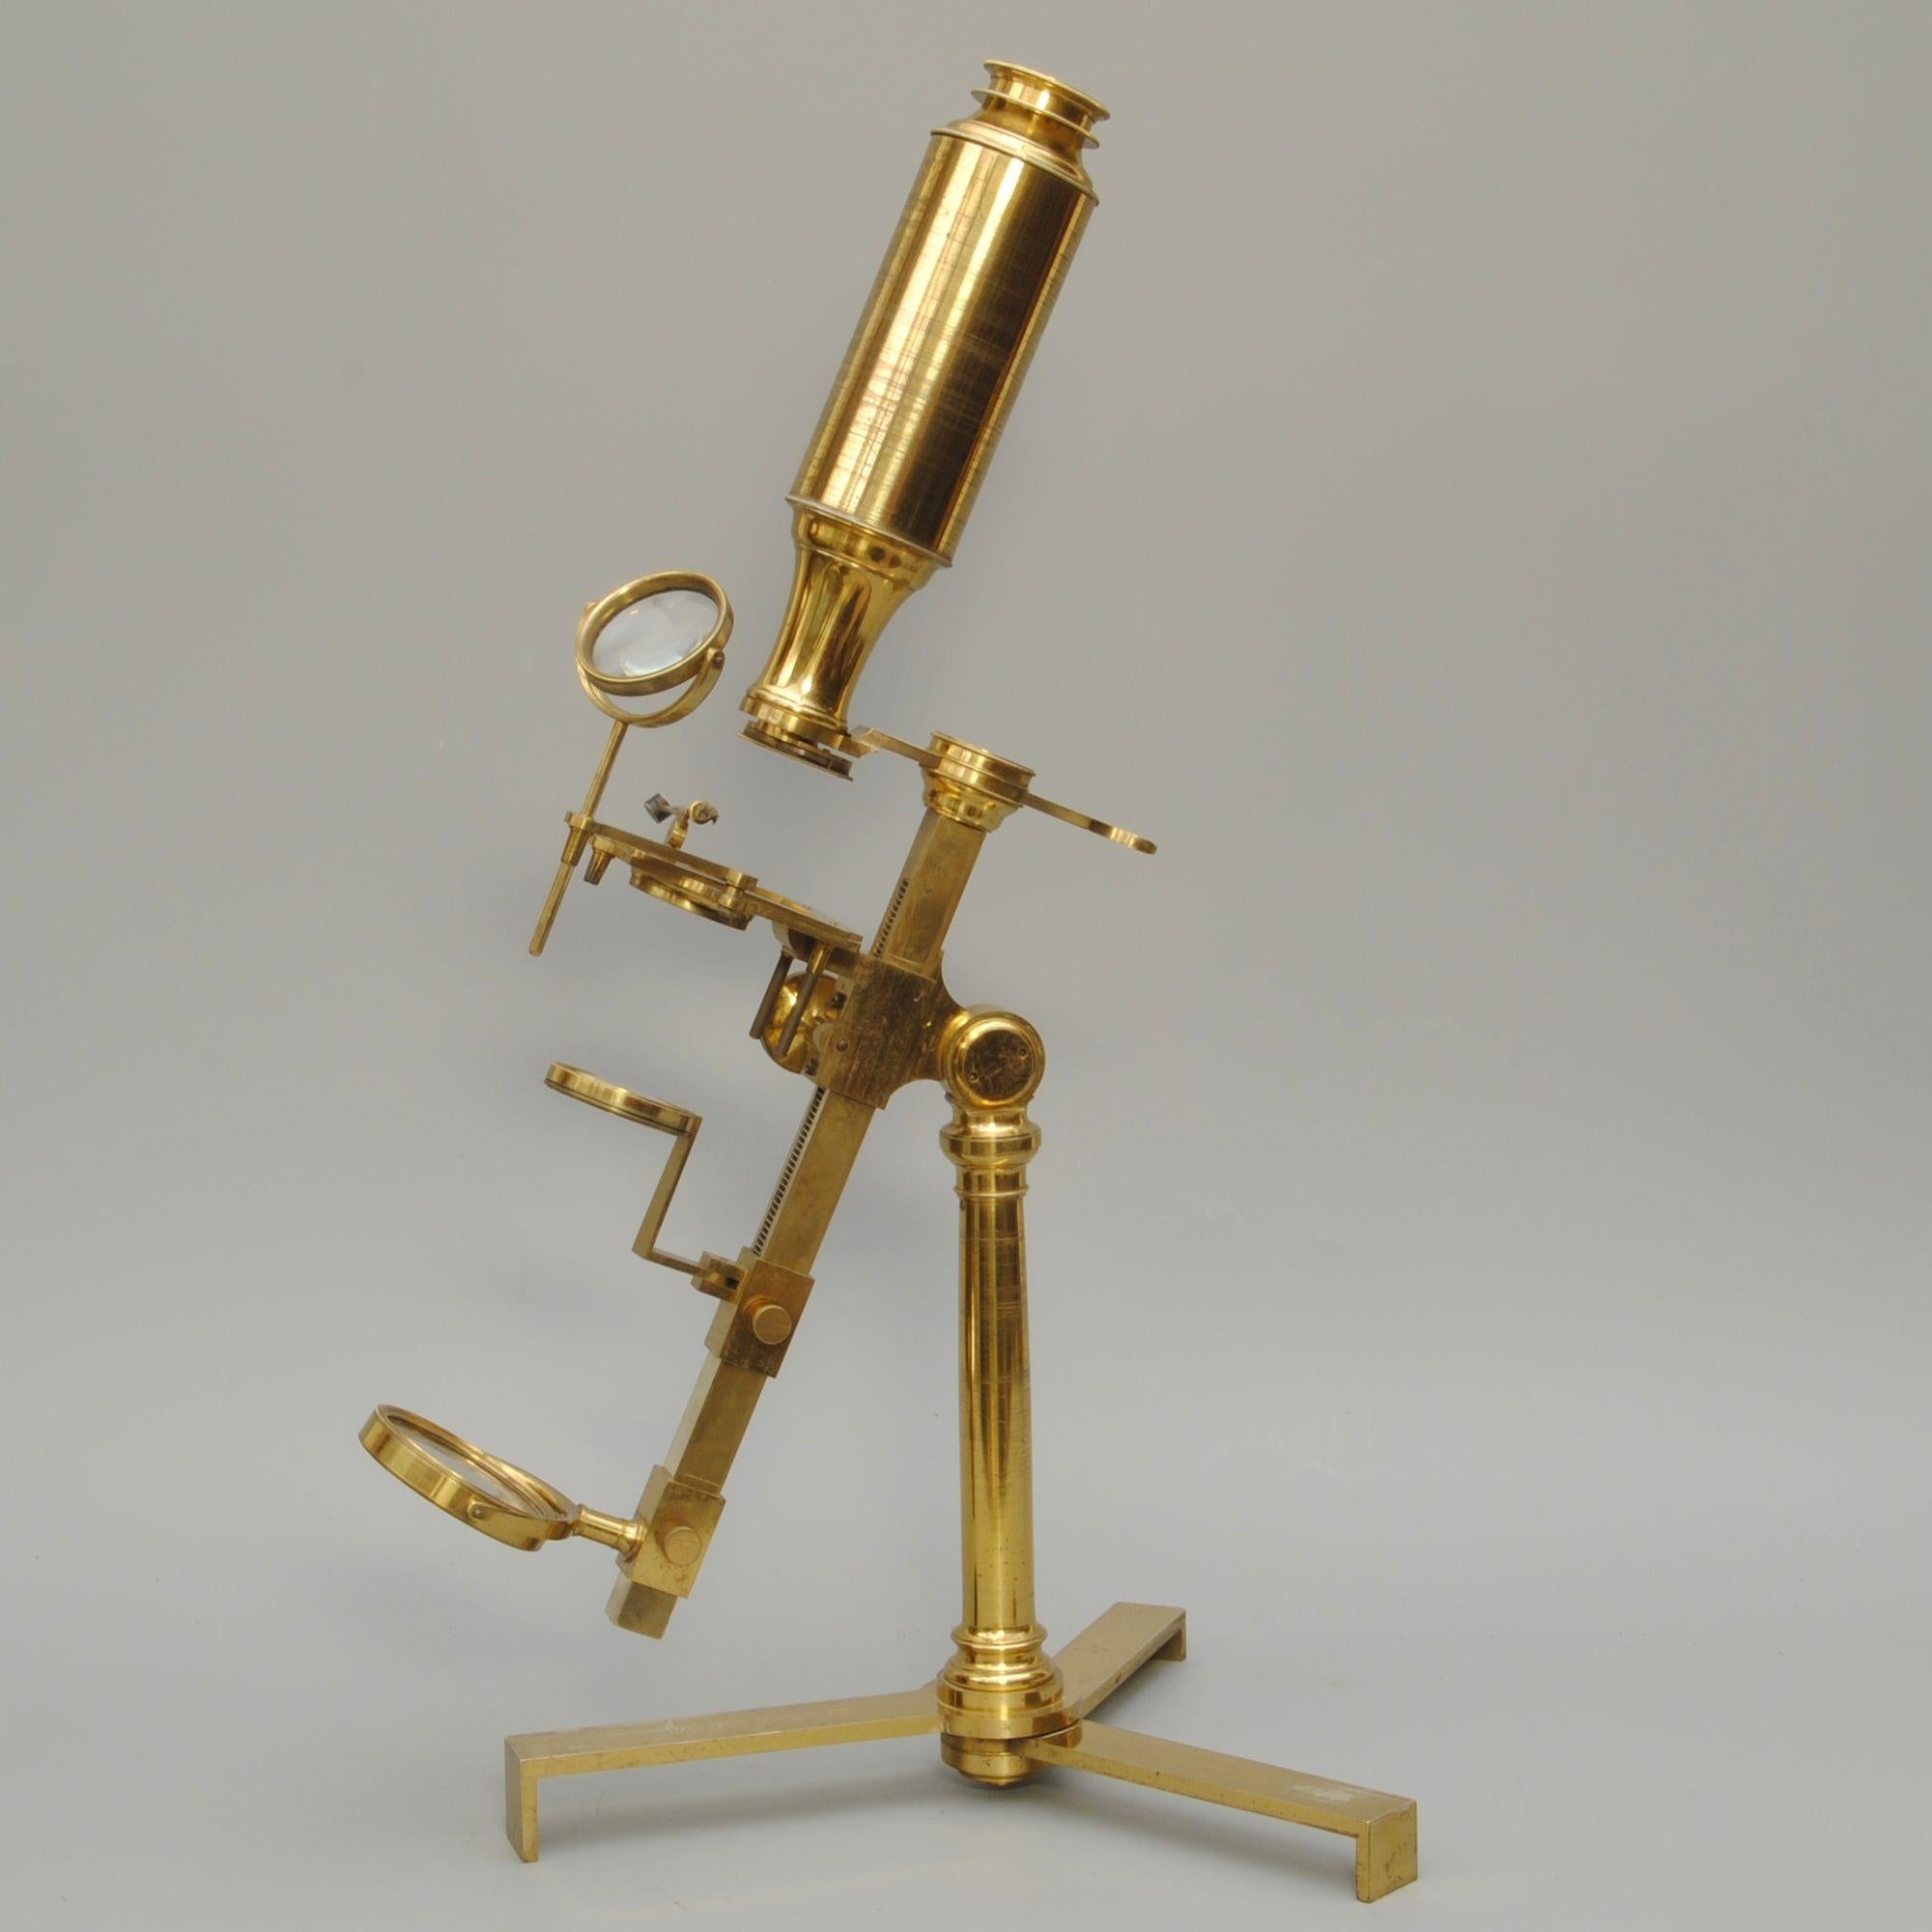 A Jones most improved compound microscope by Dollond, London. The original fitted mahogany case complete with the set of accessories. The instrument is in superb original condition and one of the nicest example we have had.
Circa 1810.